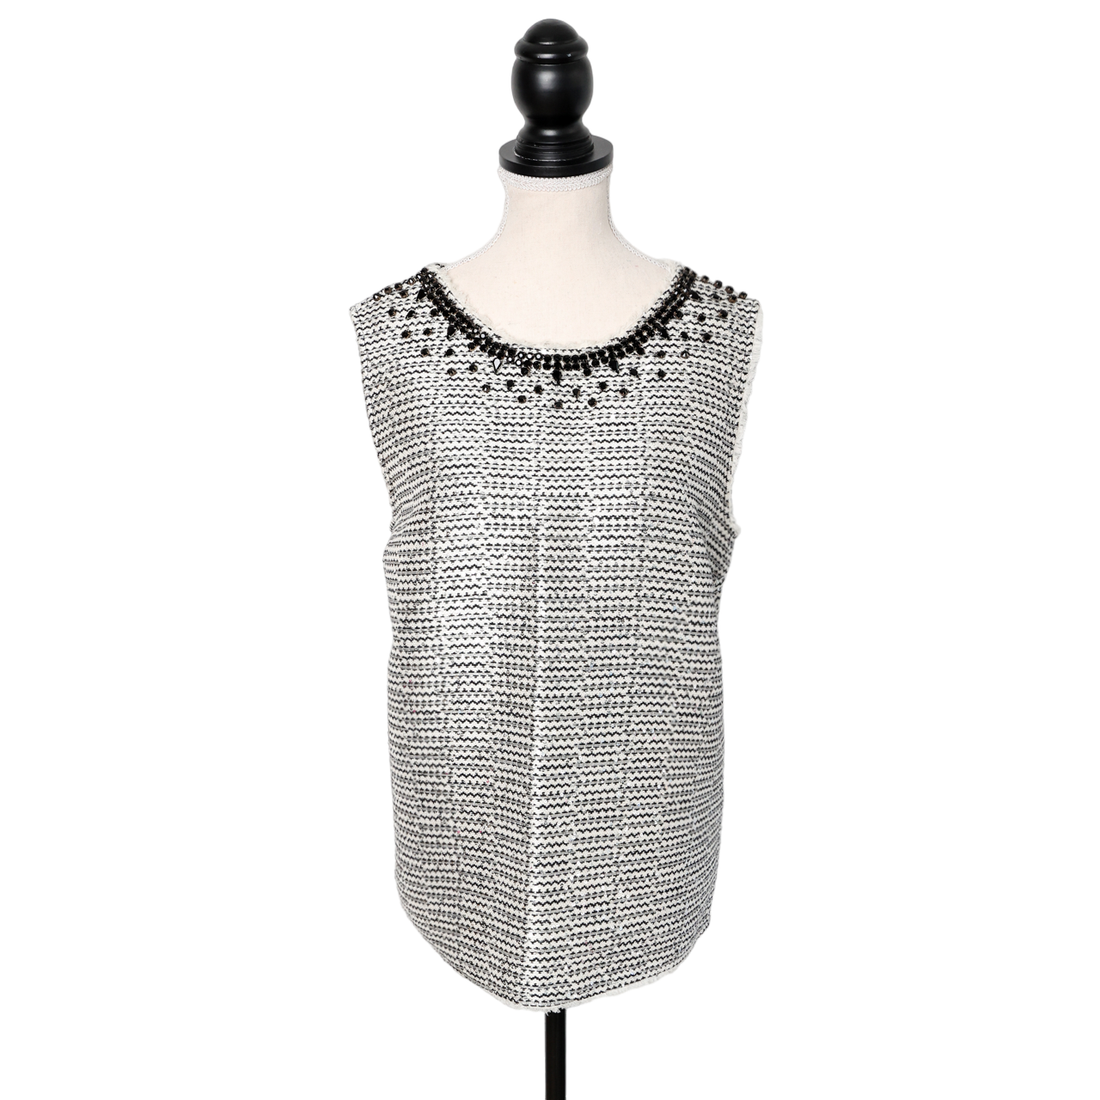 Ermanno Scervino Lavishly embroidered top with sequins